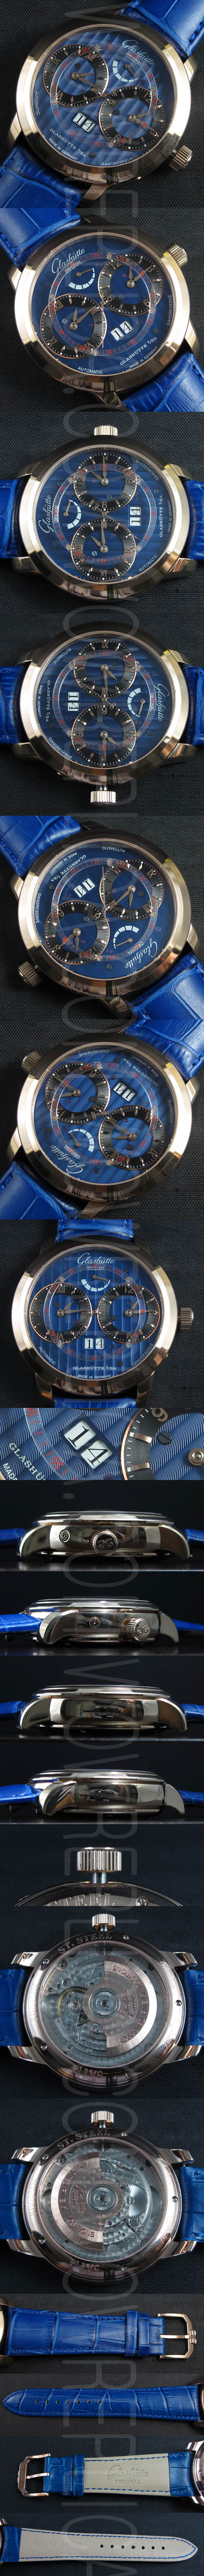 Replica Glashutte Dual Time Power-Reserve Watches